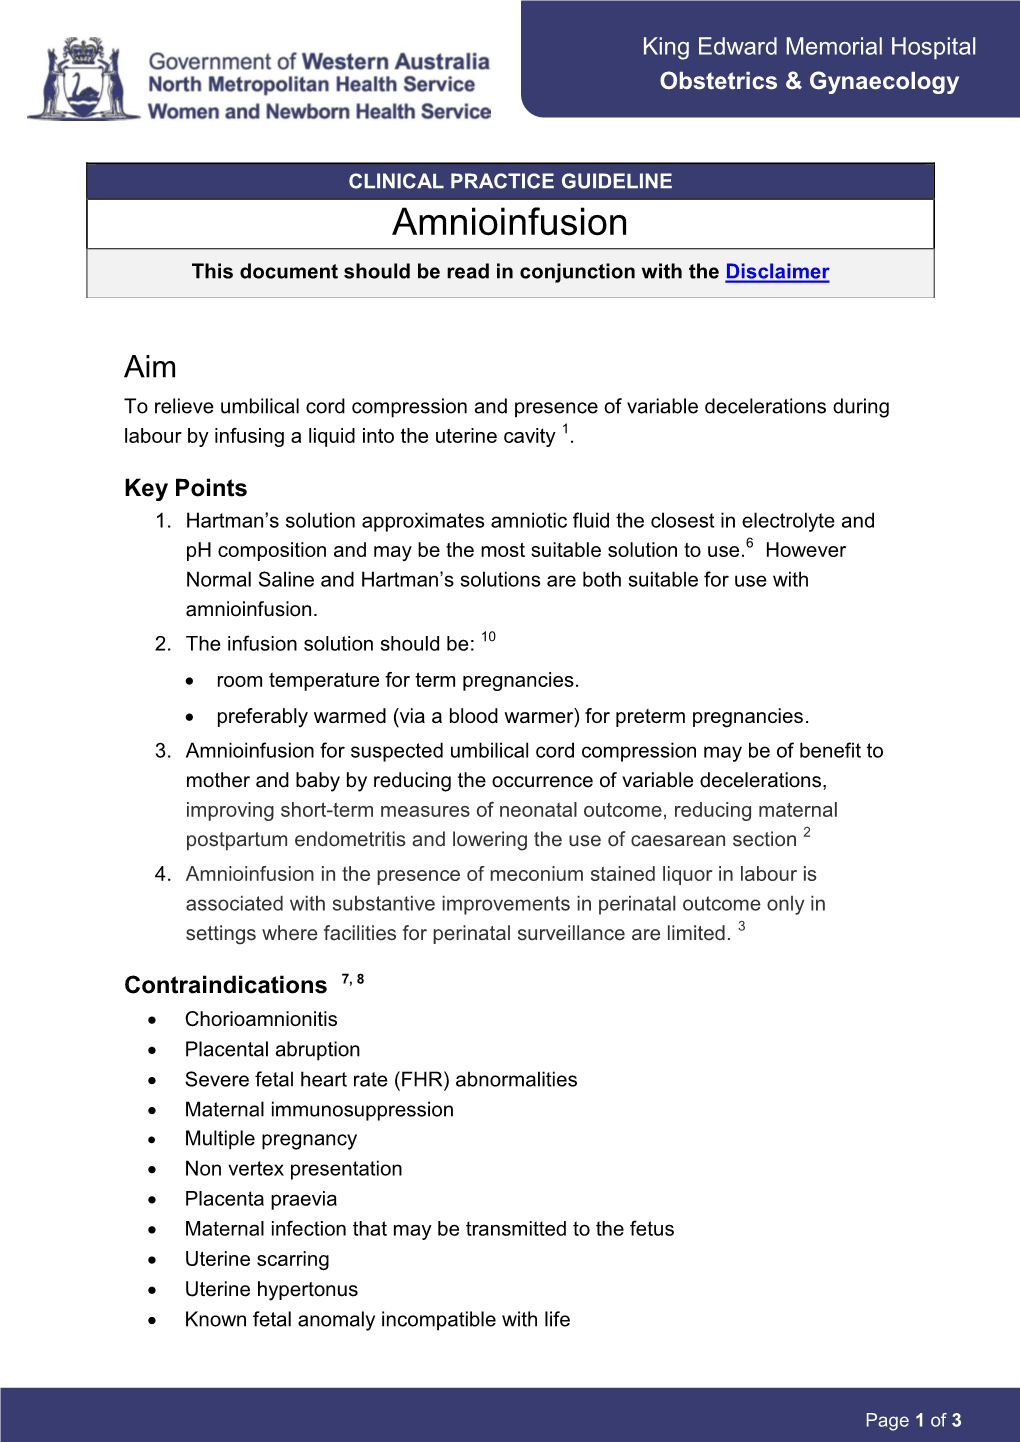 Amnioinfusion This Document Should Be Read in Conjunction with the Disclaimer